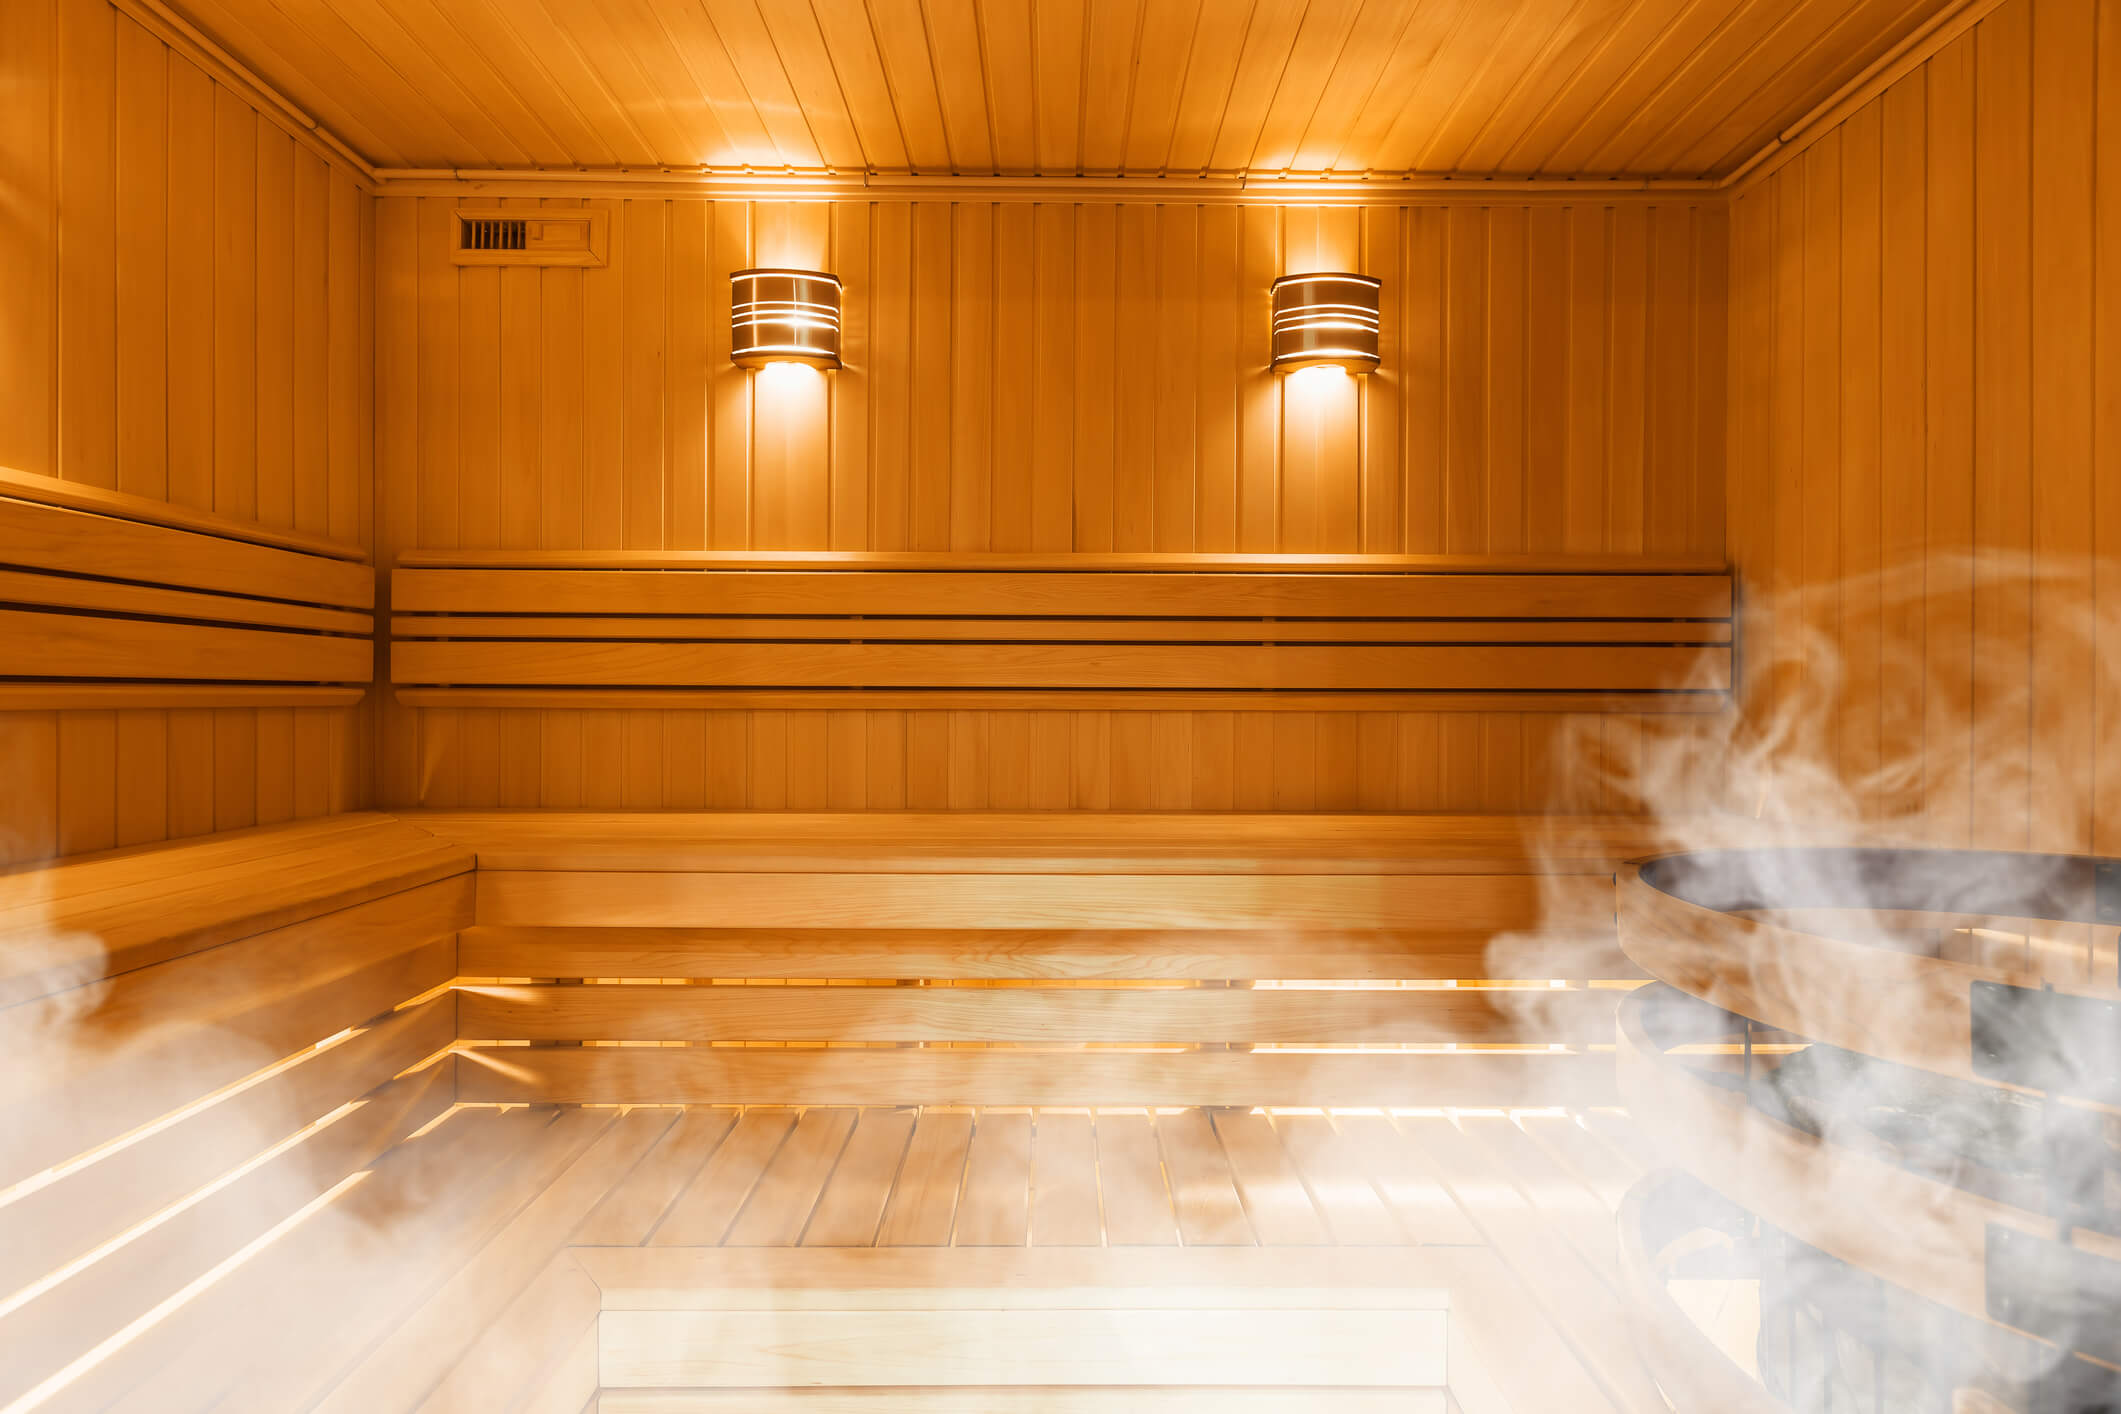 What Should You Know Before Buying a Sauna?